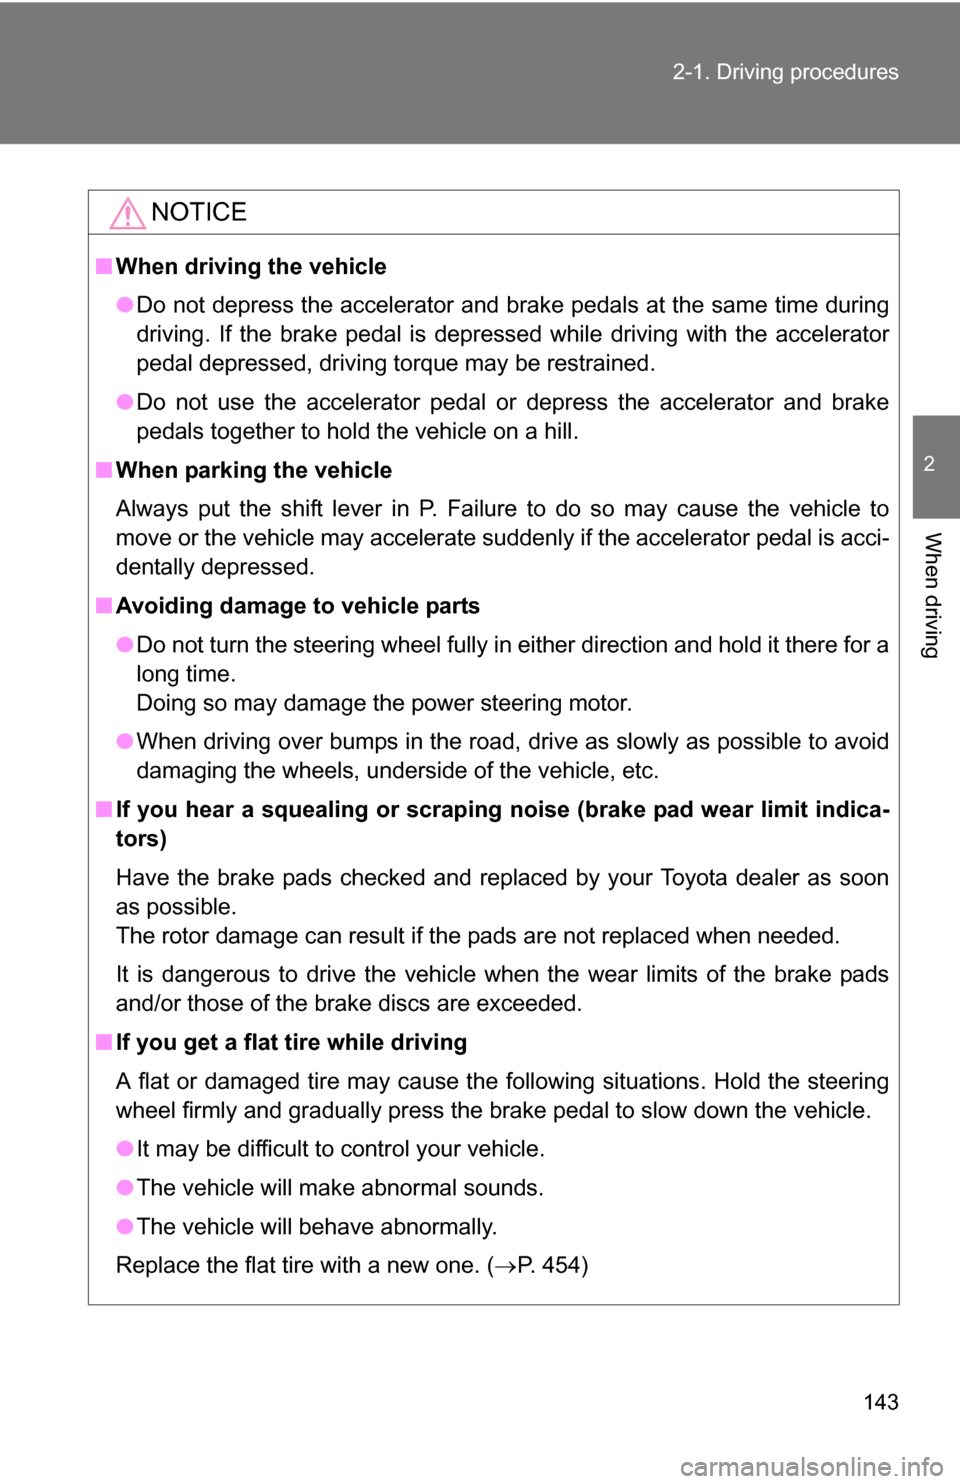 TOYOTA RAV4 2012 XA30 / 3.G Owners Manual 143
2-1. Driving procedures
2
When driving
NOTICE
■
When driving the vehicle
●Do not depress the accelerator and brake pedals at the same time during
driving. If the brake pedal is depressed while